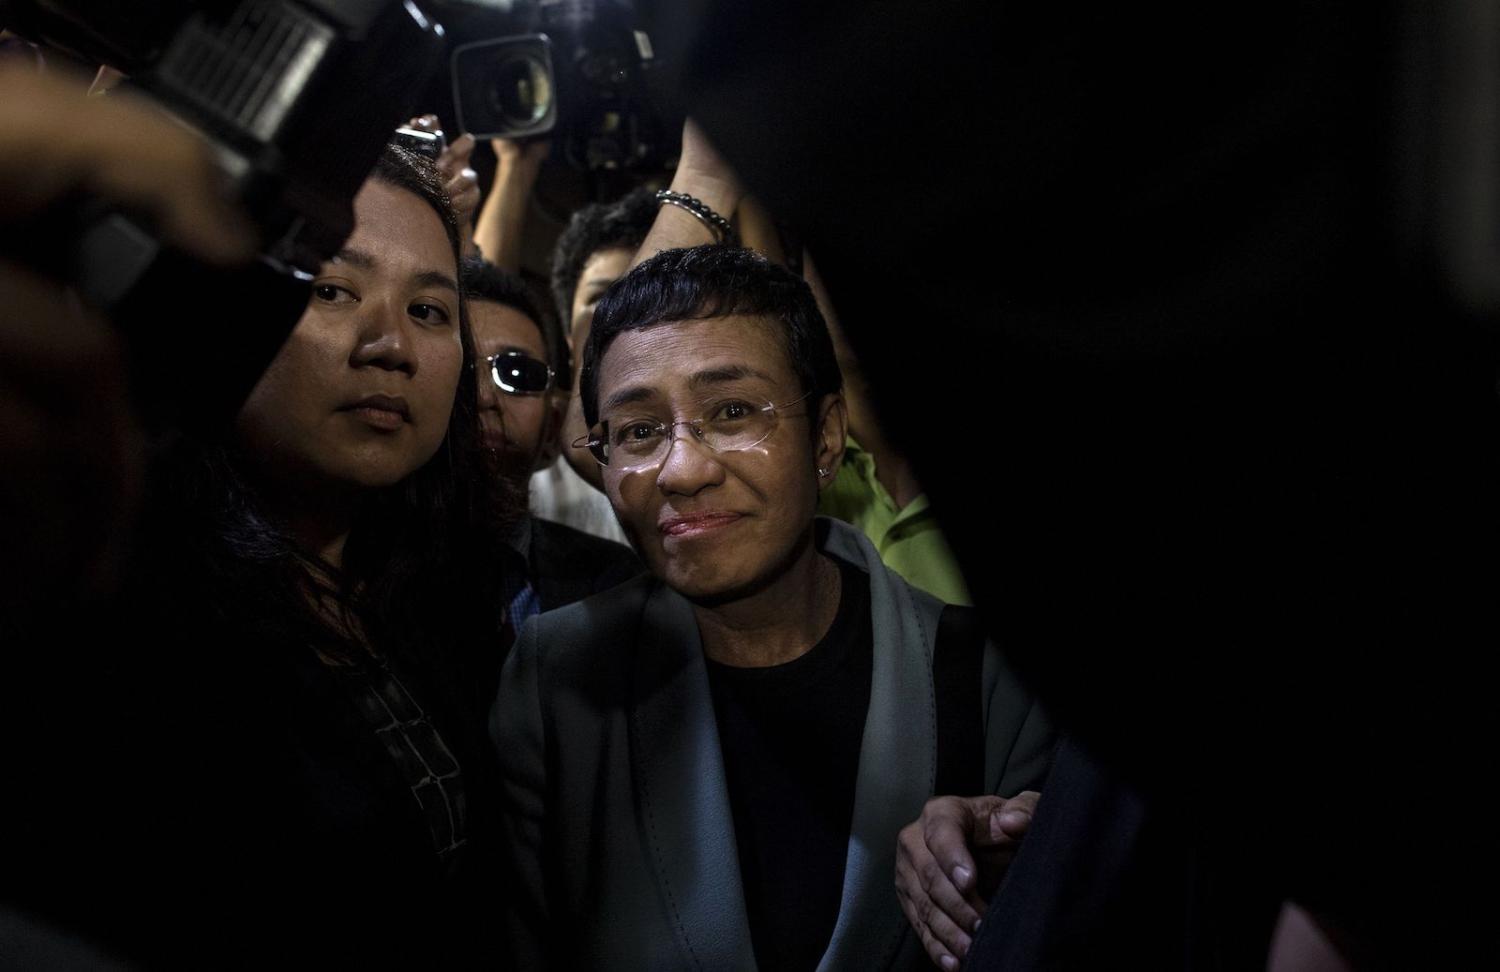 Philippine journalist Maria Ressa (centre) arrives at a regional trial court in Manila to post bail in February 2019 (Noel Celis/AFP via Getty Images)